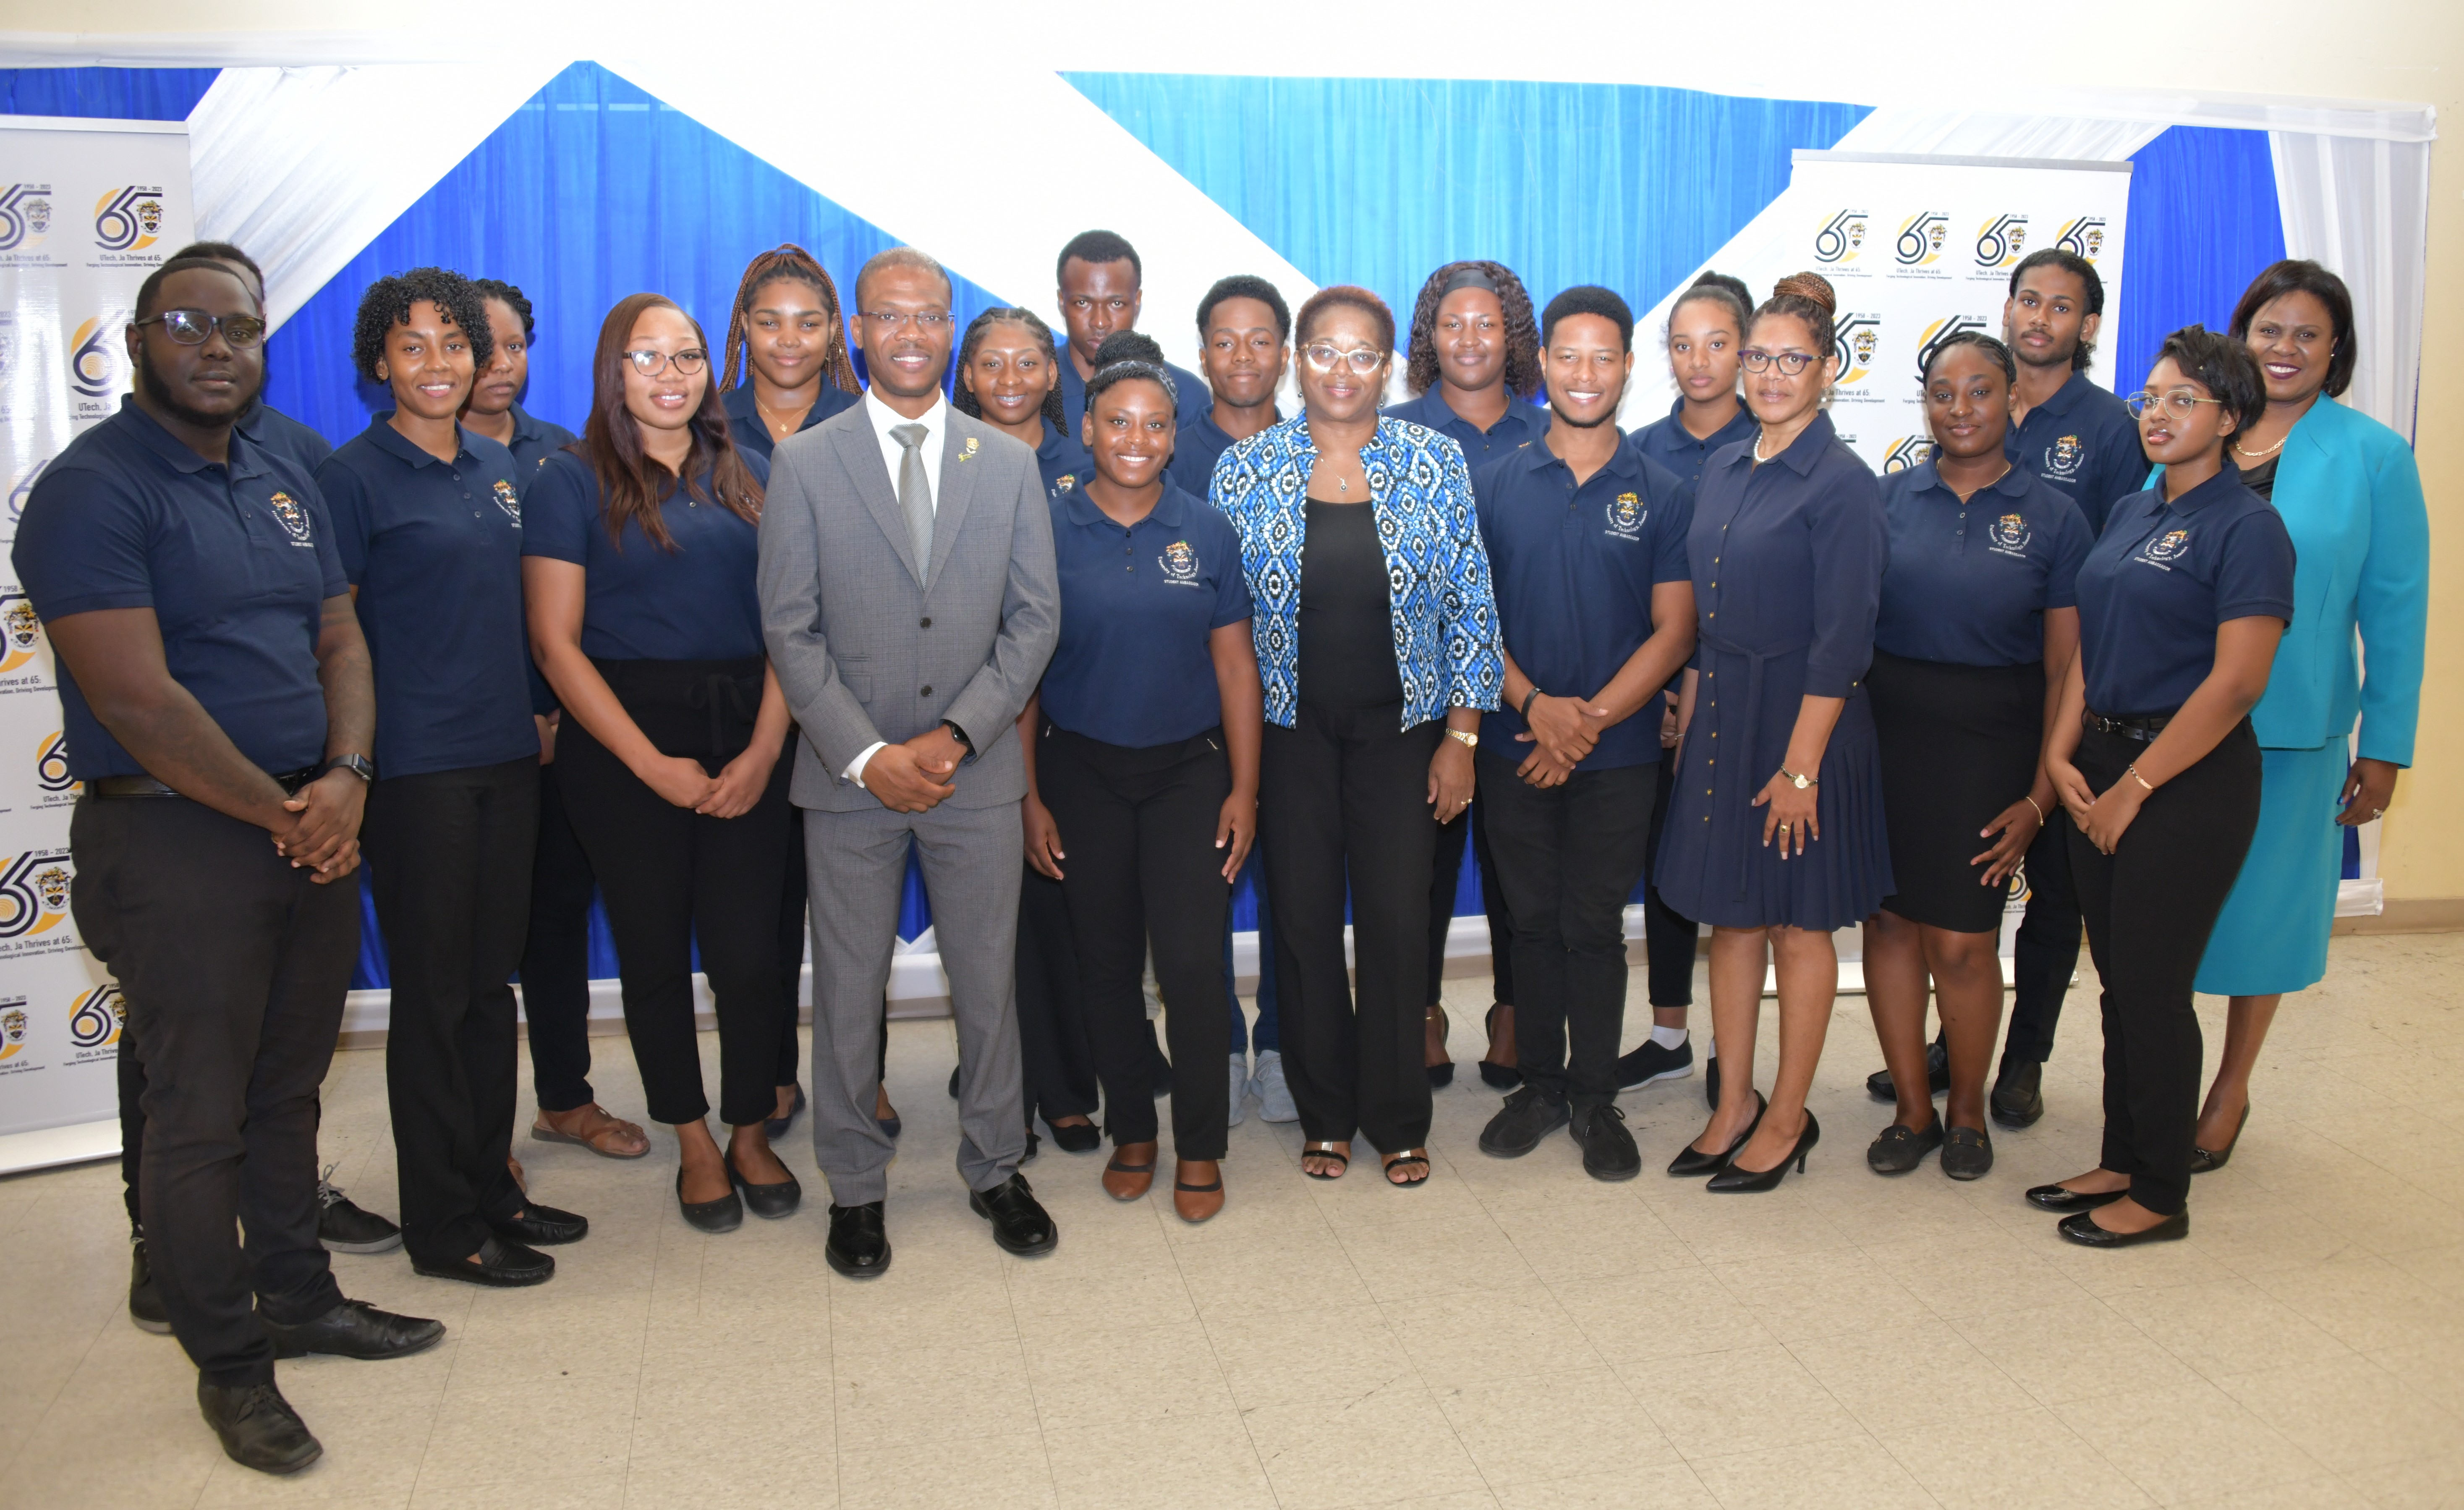 President Urges Newly Inducted Student Ambassadors to Spread “The Goodness” of UTech, Ja